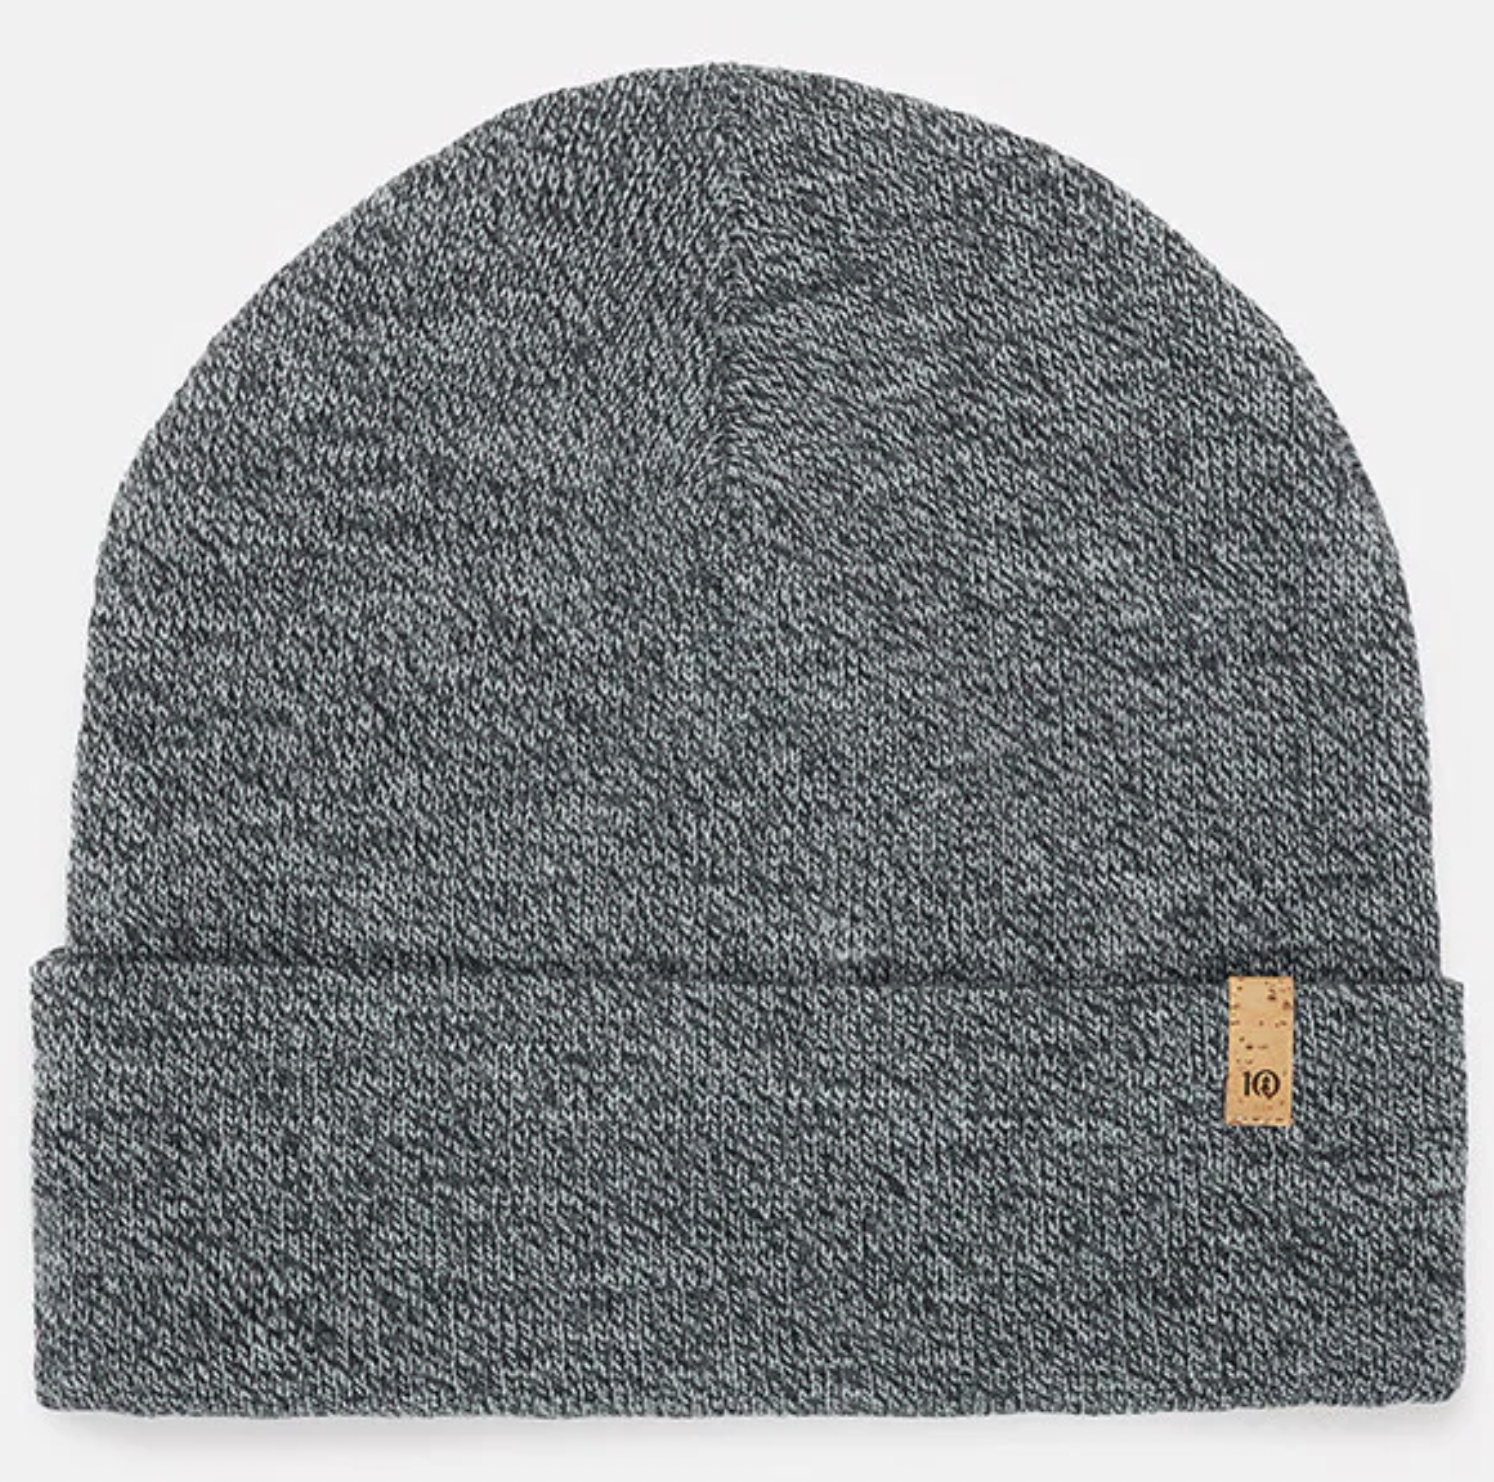 Looking to add the finishing touch to that sustainable fit? The Kurt beanie is made from a comfy blend of RWS certified wool and recycled polyester